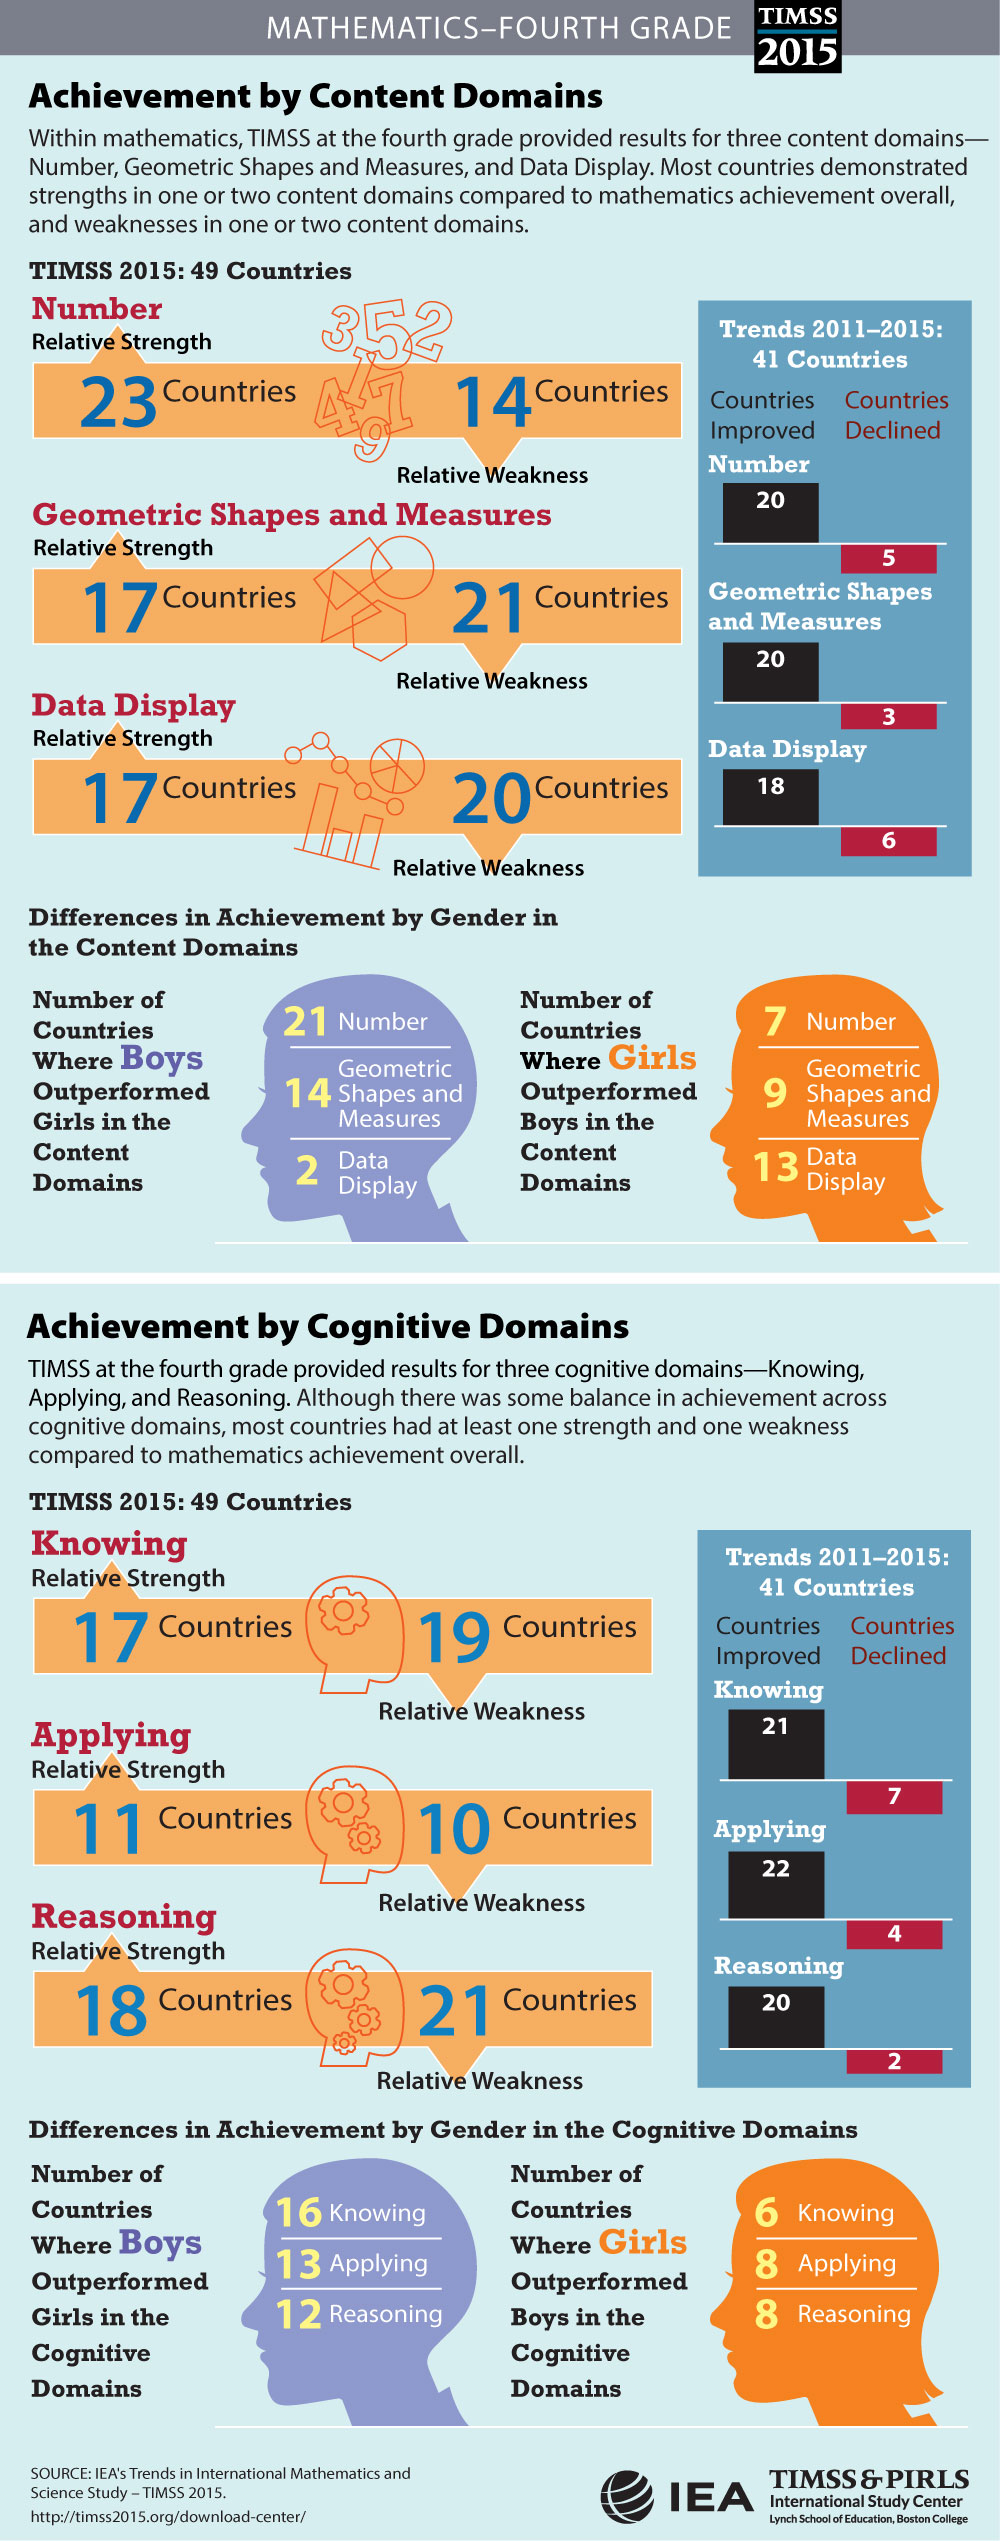 Achievement in Content and Cognitive Domains (G4) Infographic